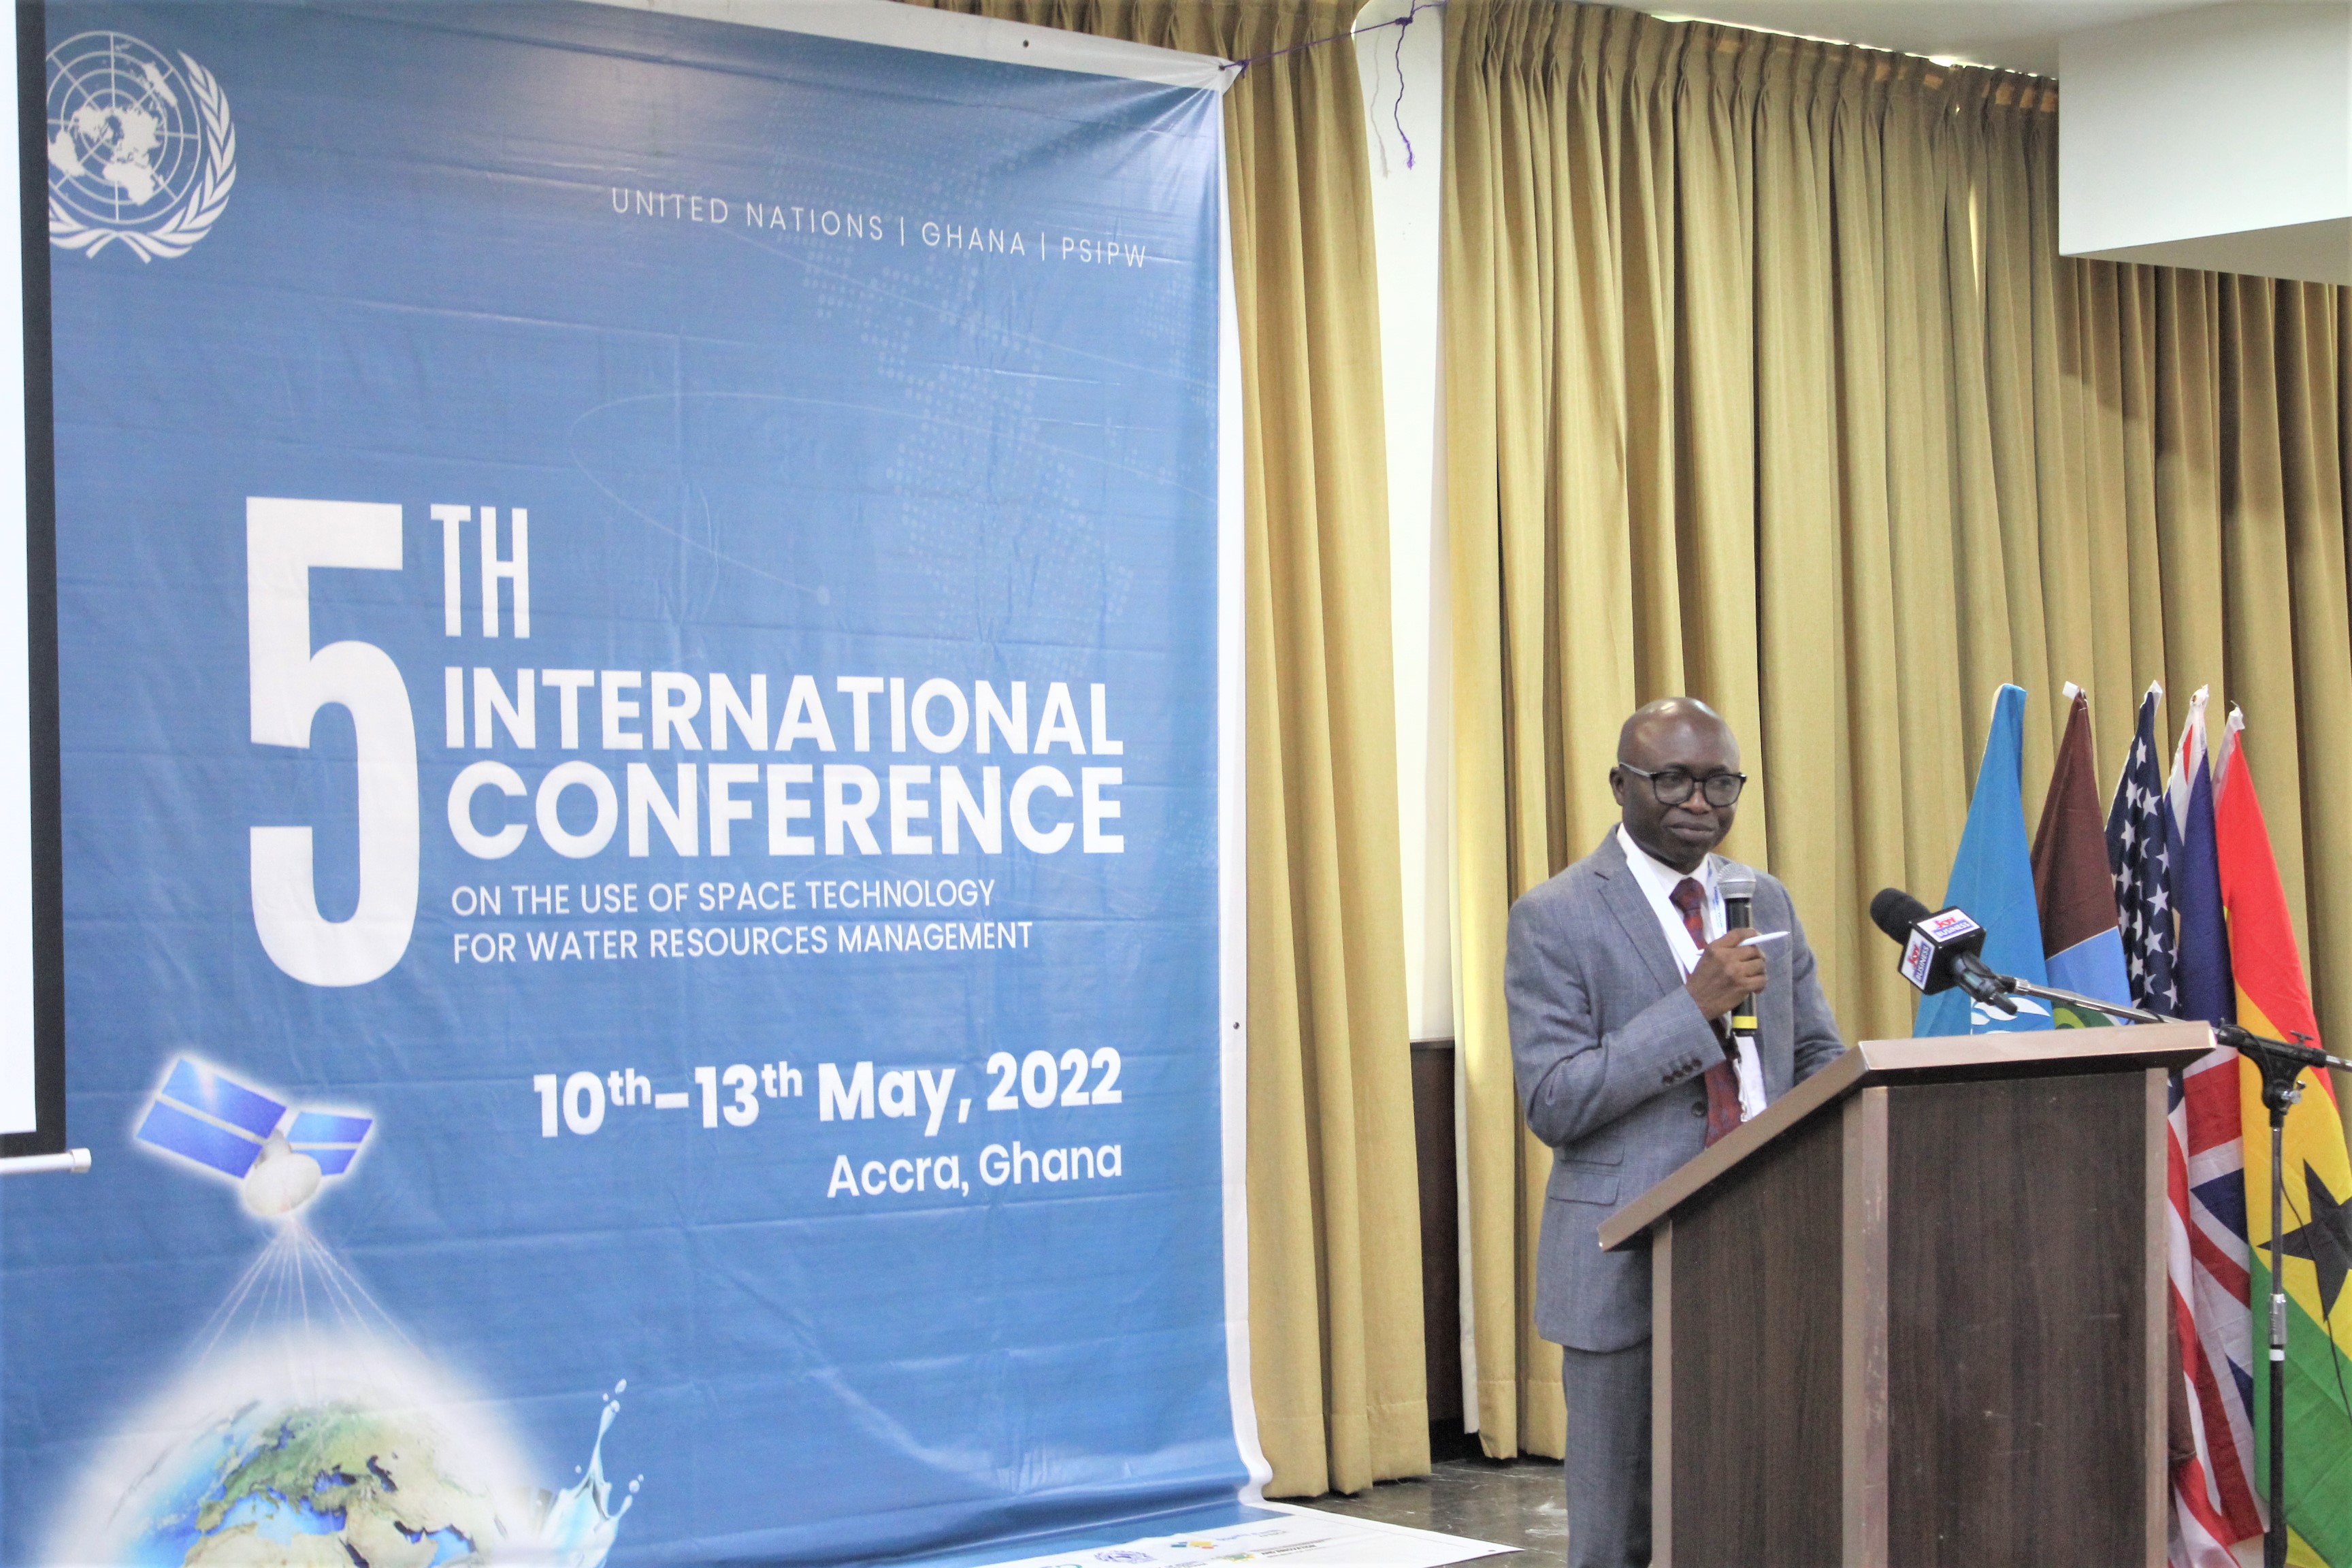 5th International Conference on the Use of Space Technology for Water Resource Management Opens in Accra